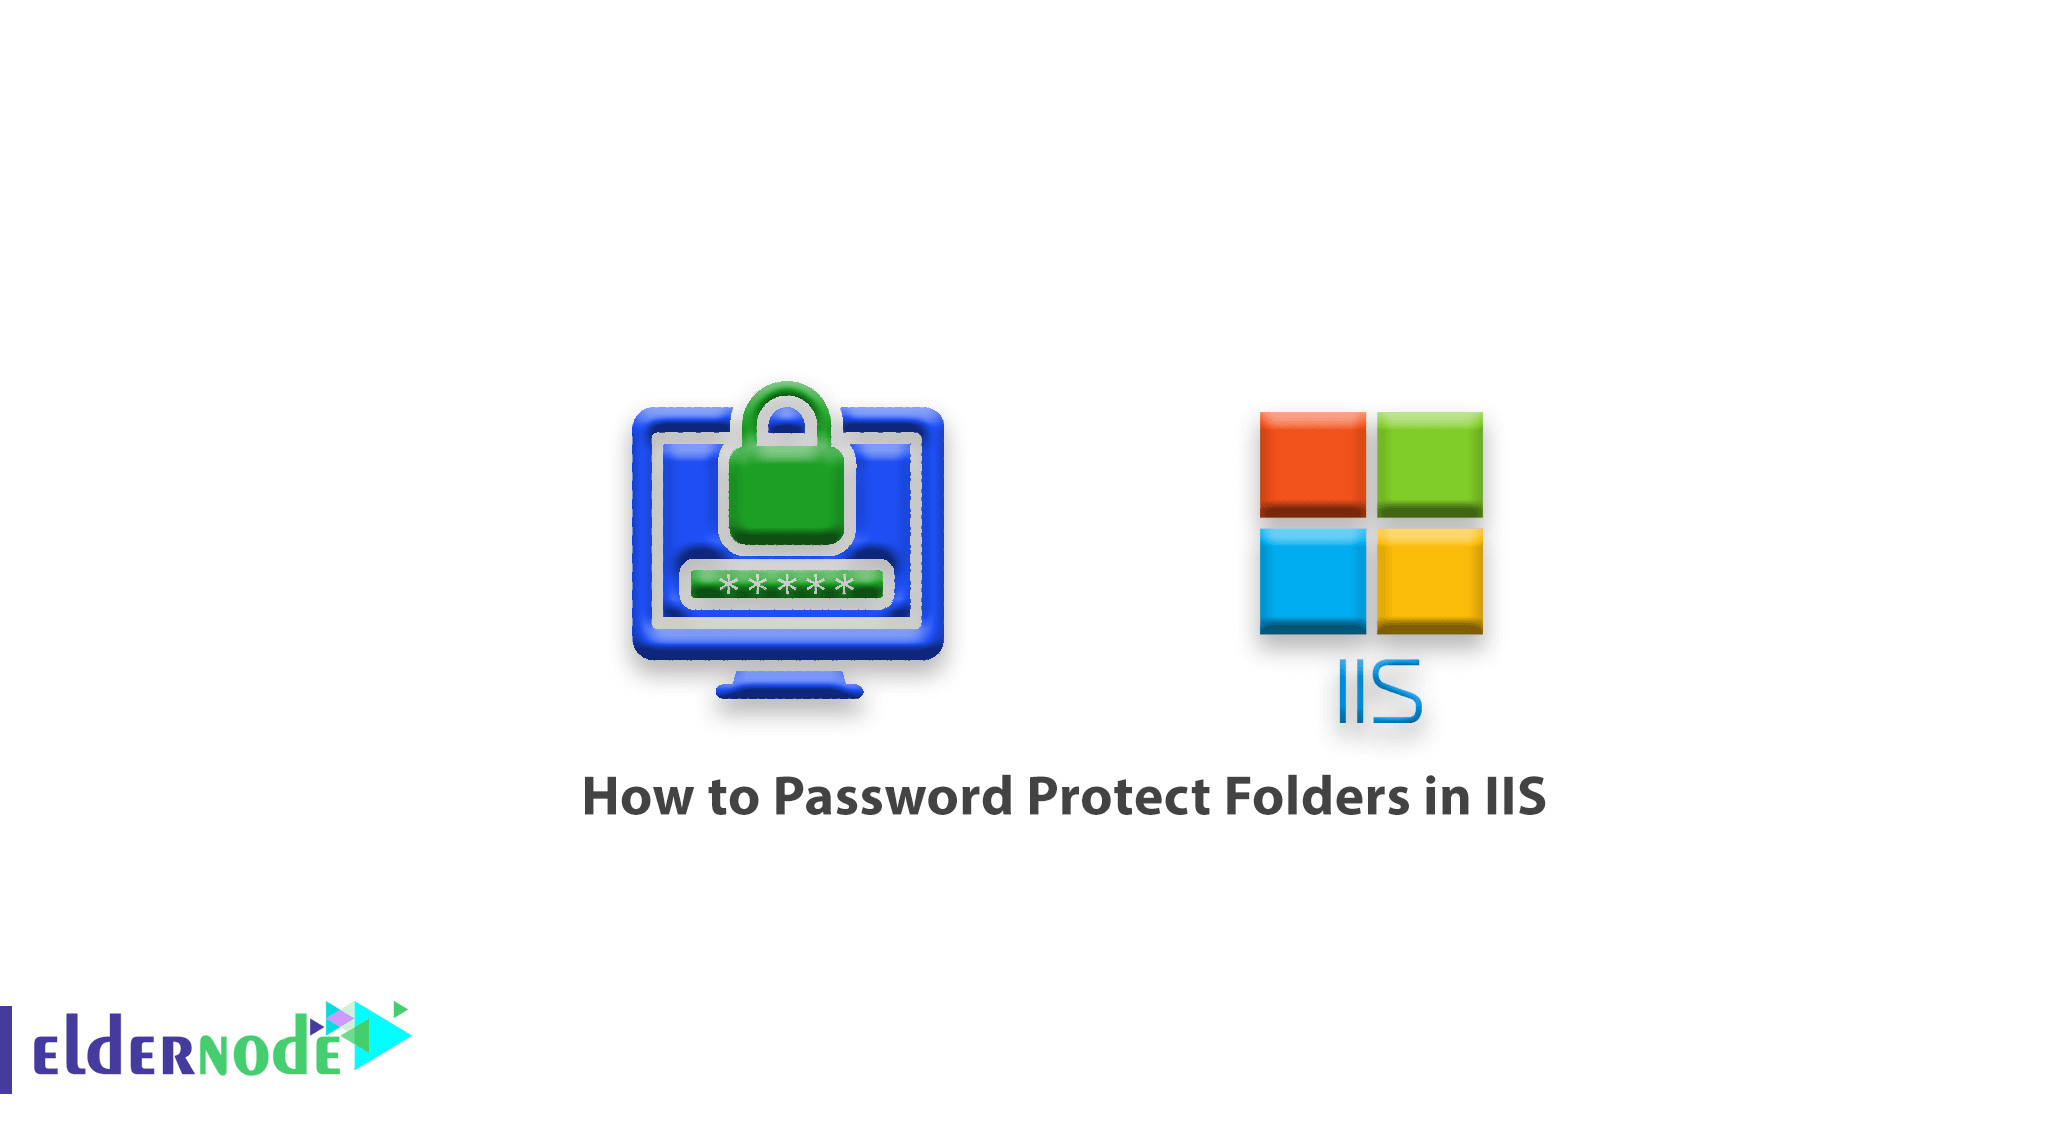 How to Password Protect Folders in IIS